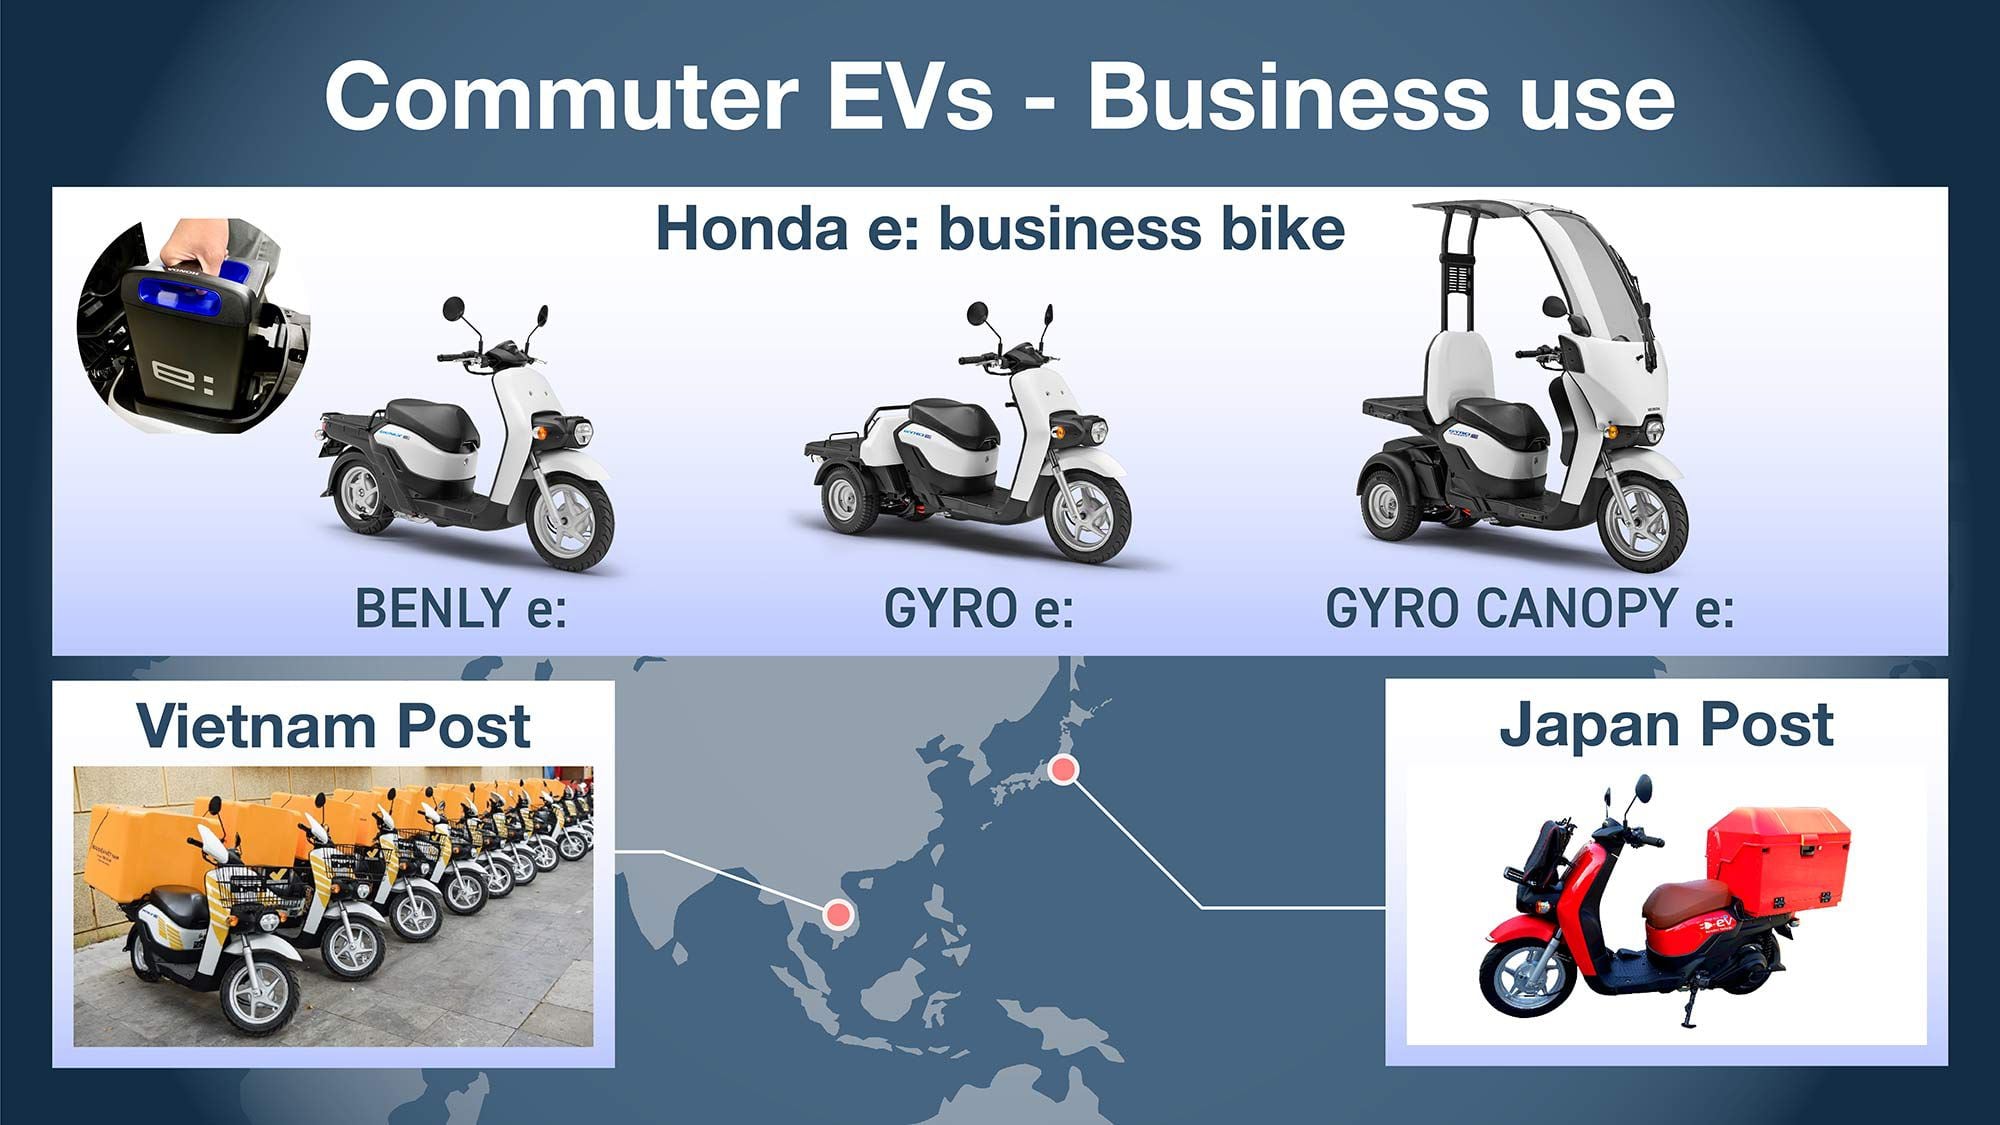 Honda is already selling electric two-wheelers in markets like Japan and India.